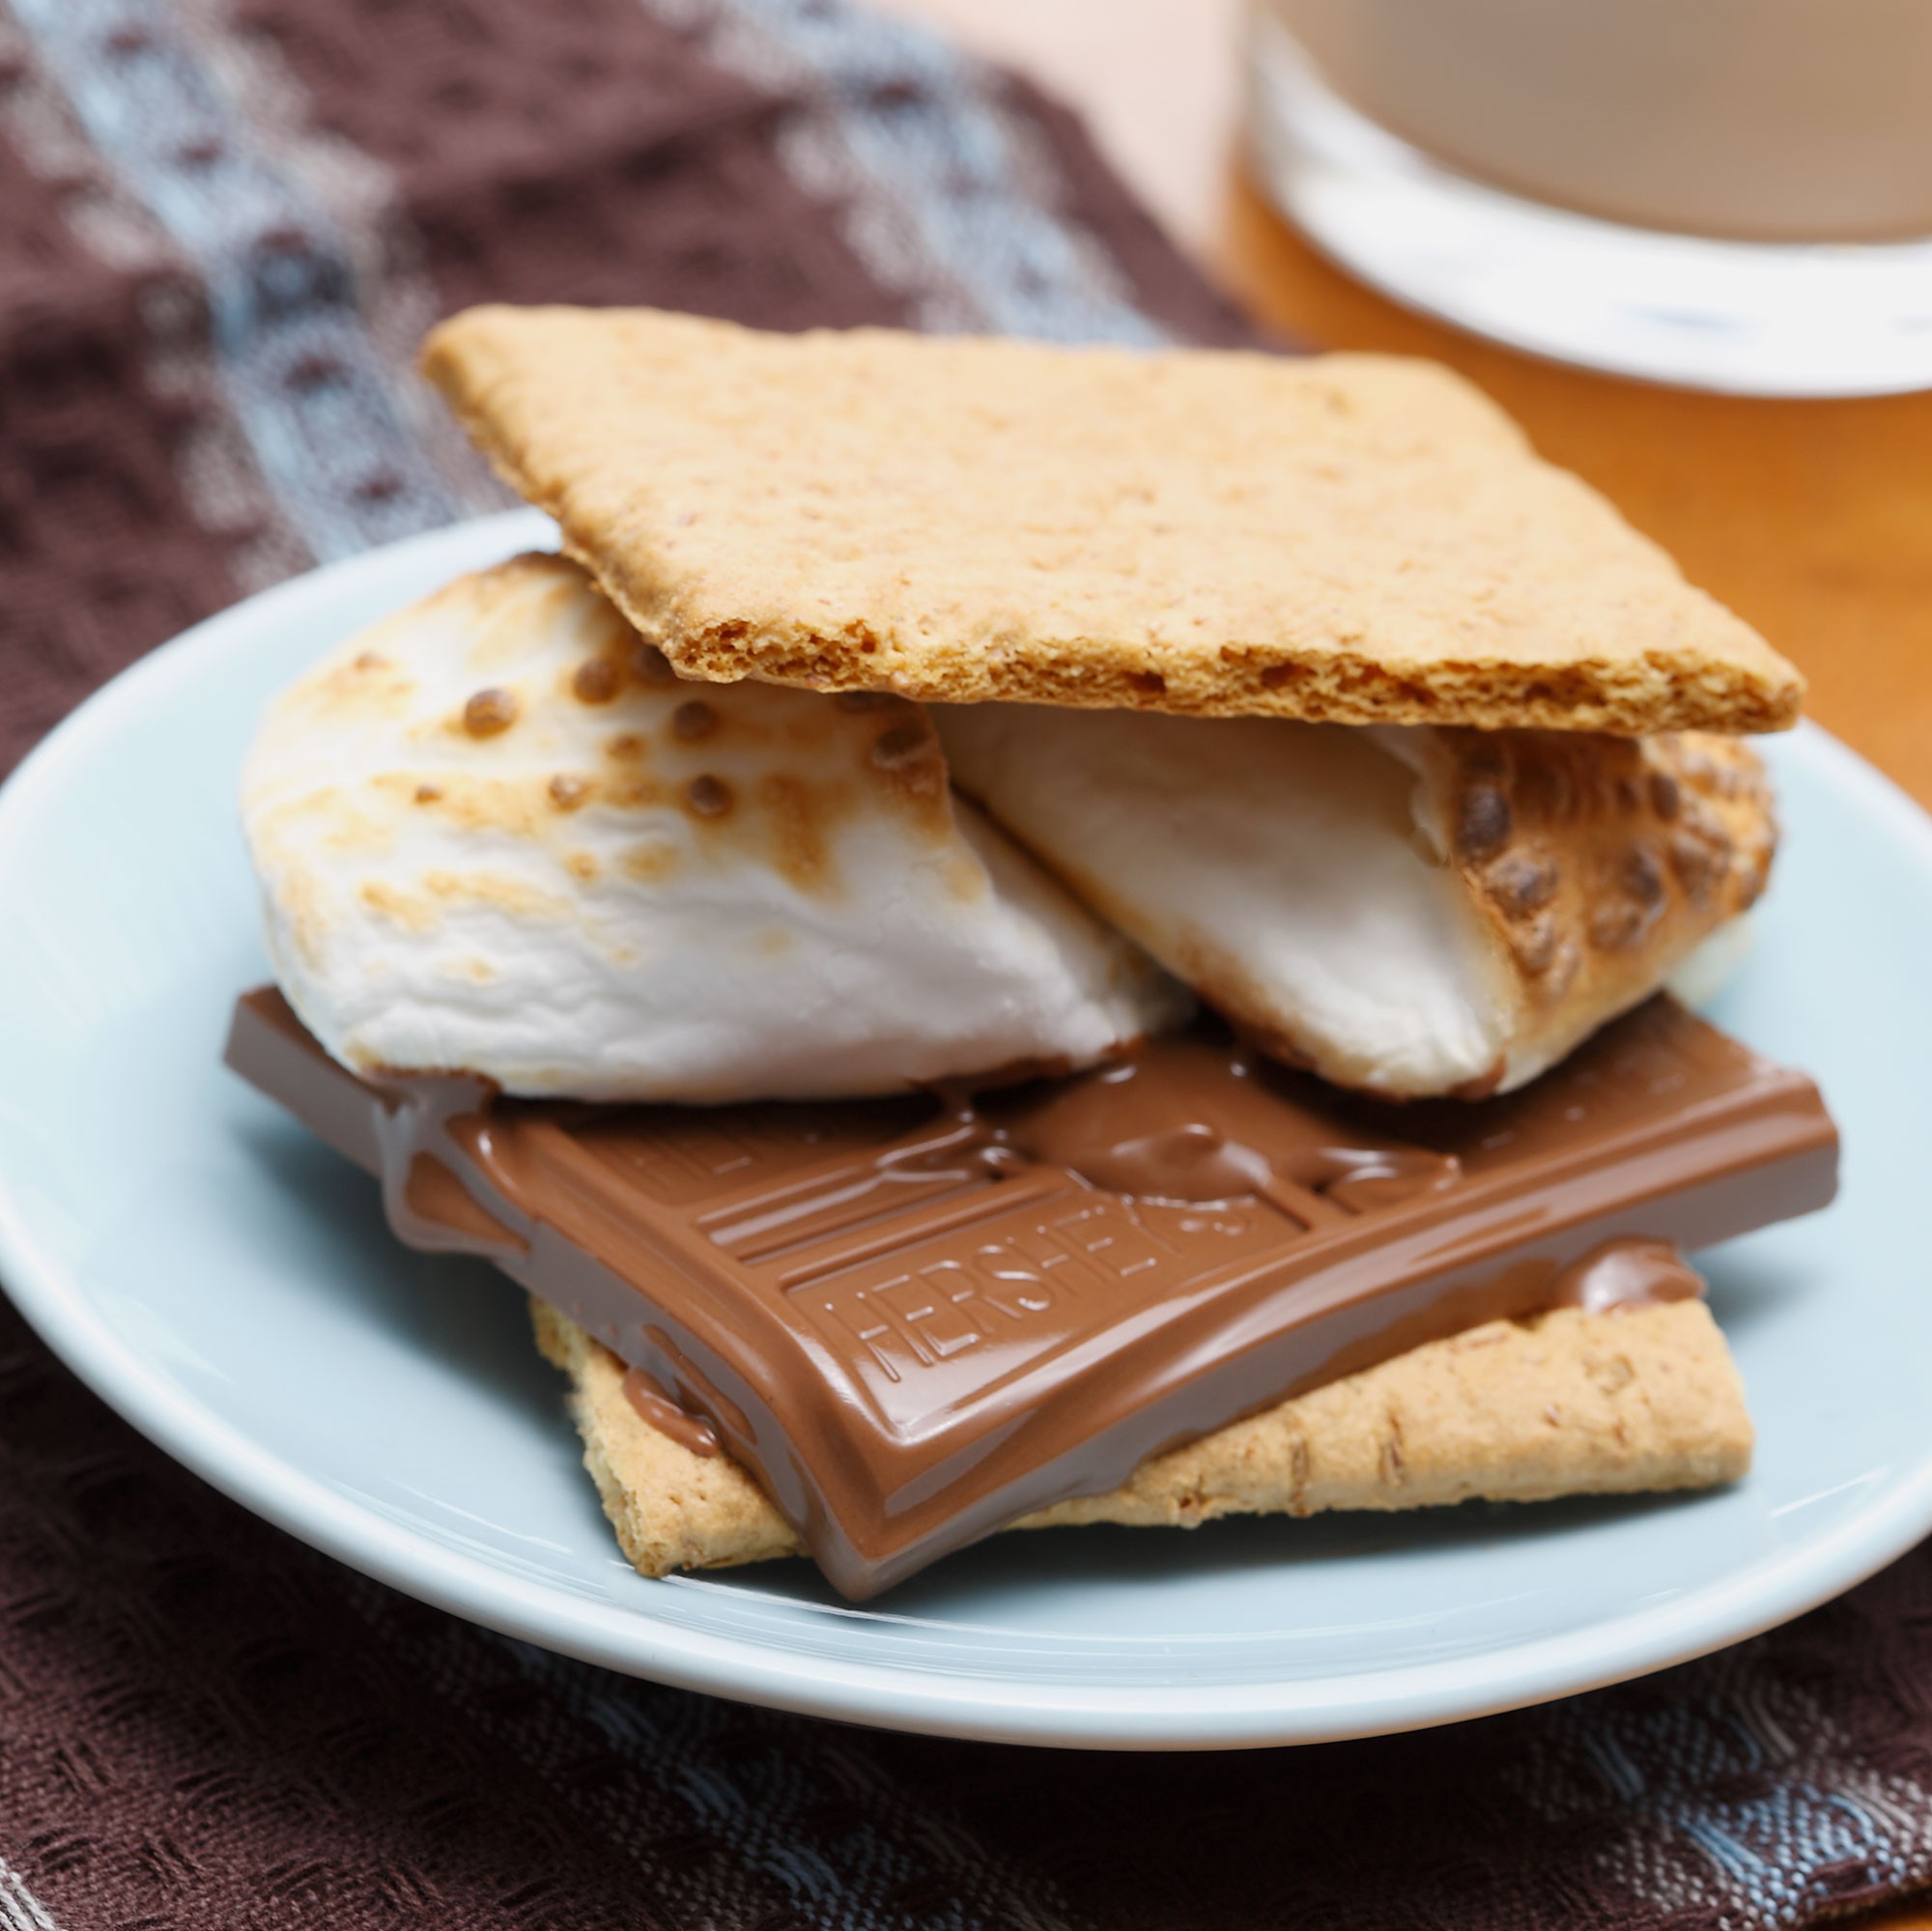 S'mores photograph done by Andre Van Vugt, GiantVision